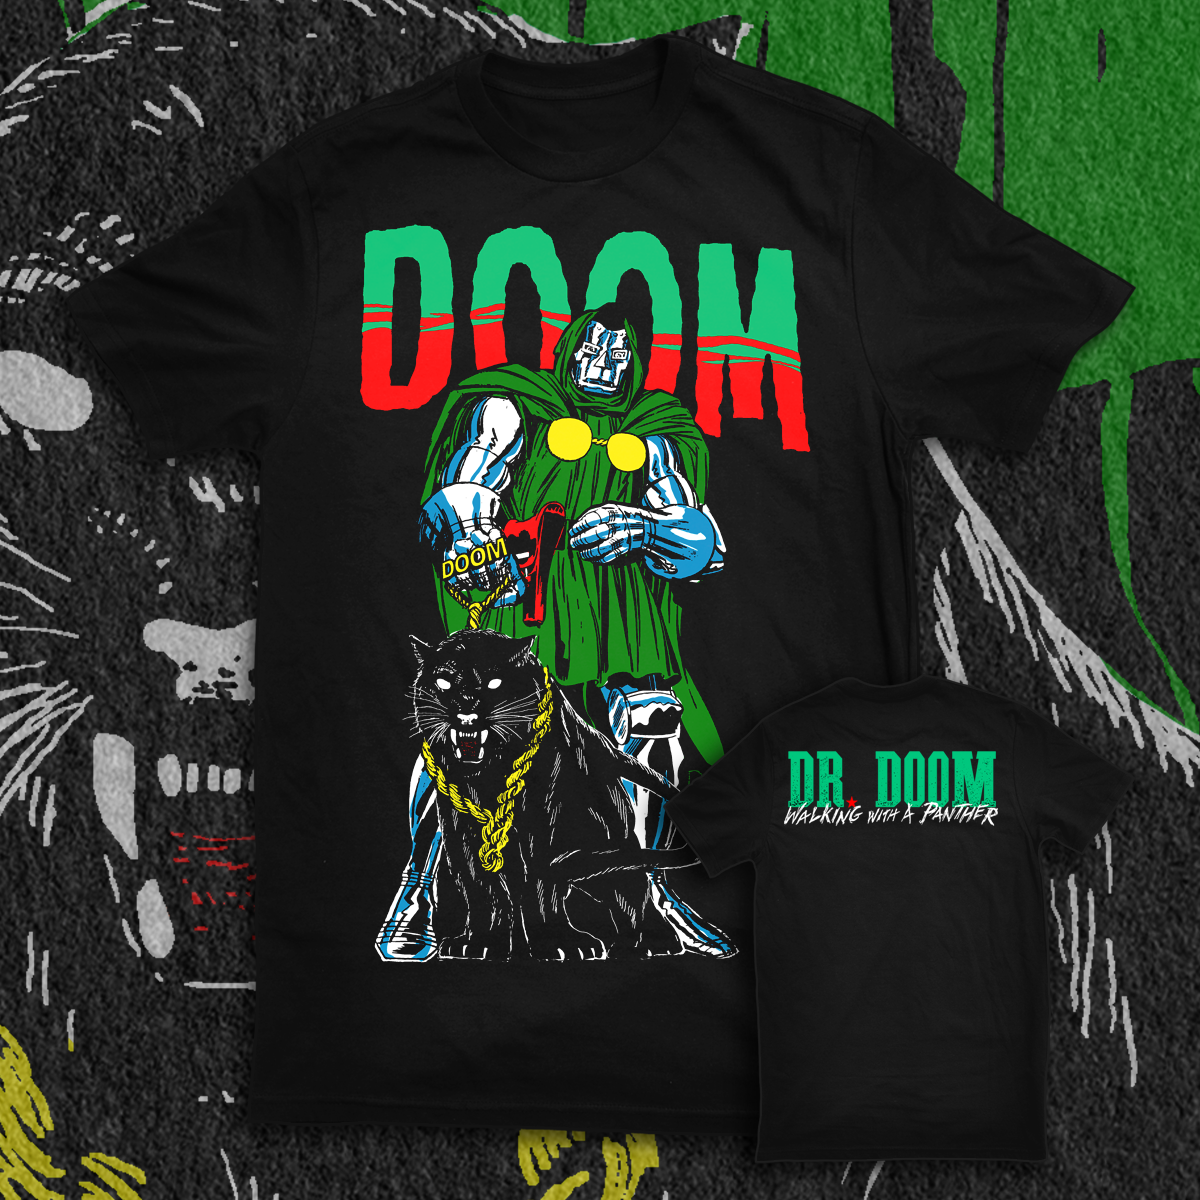 DOOM "WALKING WITH A PANTHER" SHIRT (PRE ORDER)